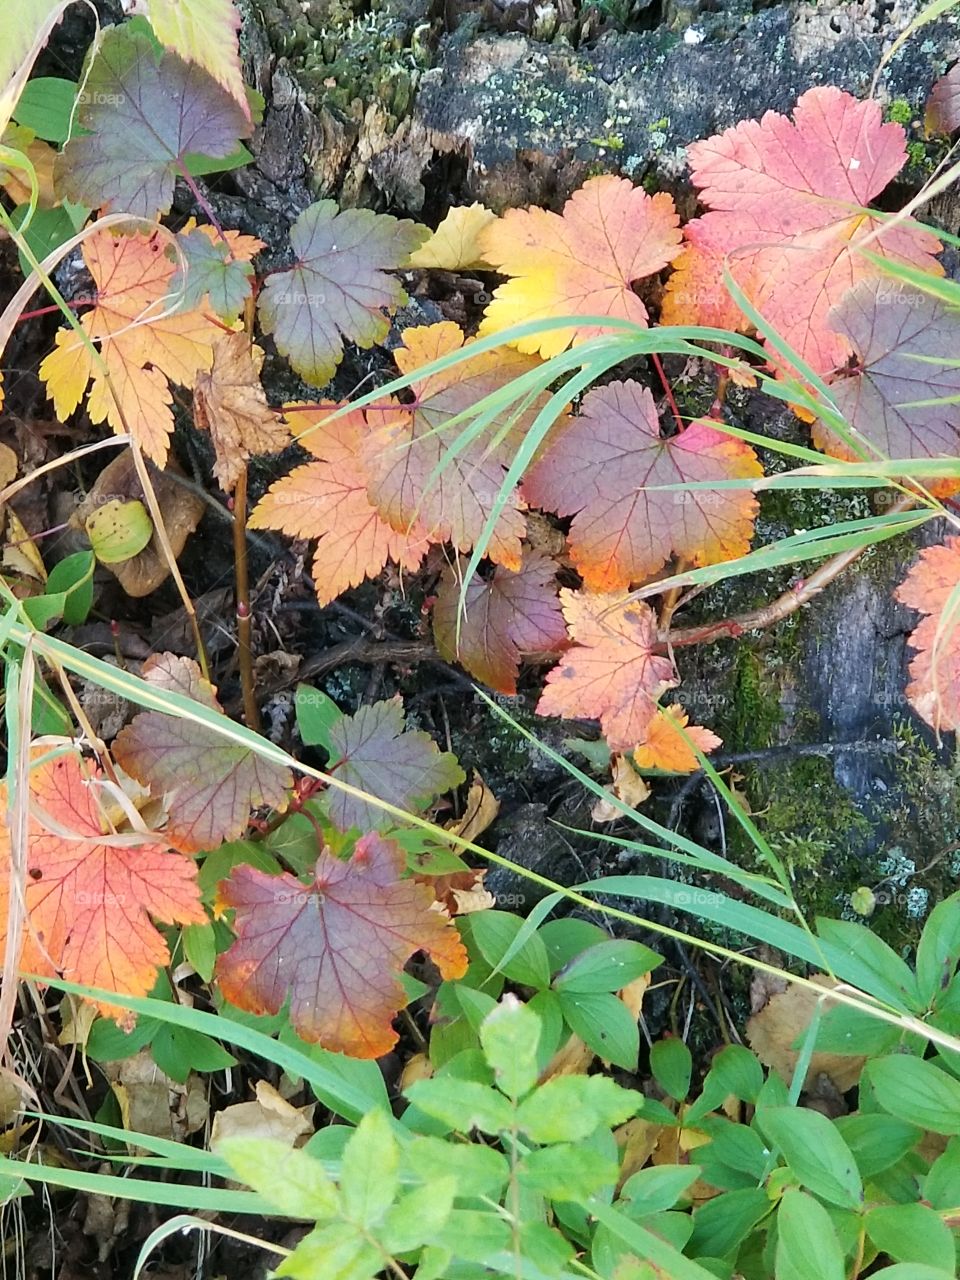 Currant leaves in Autumn